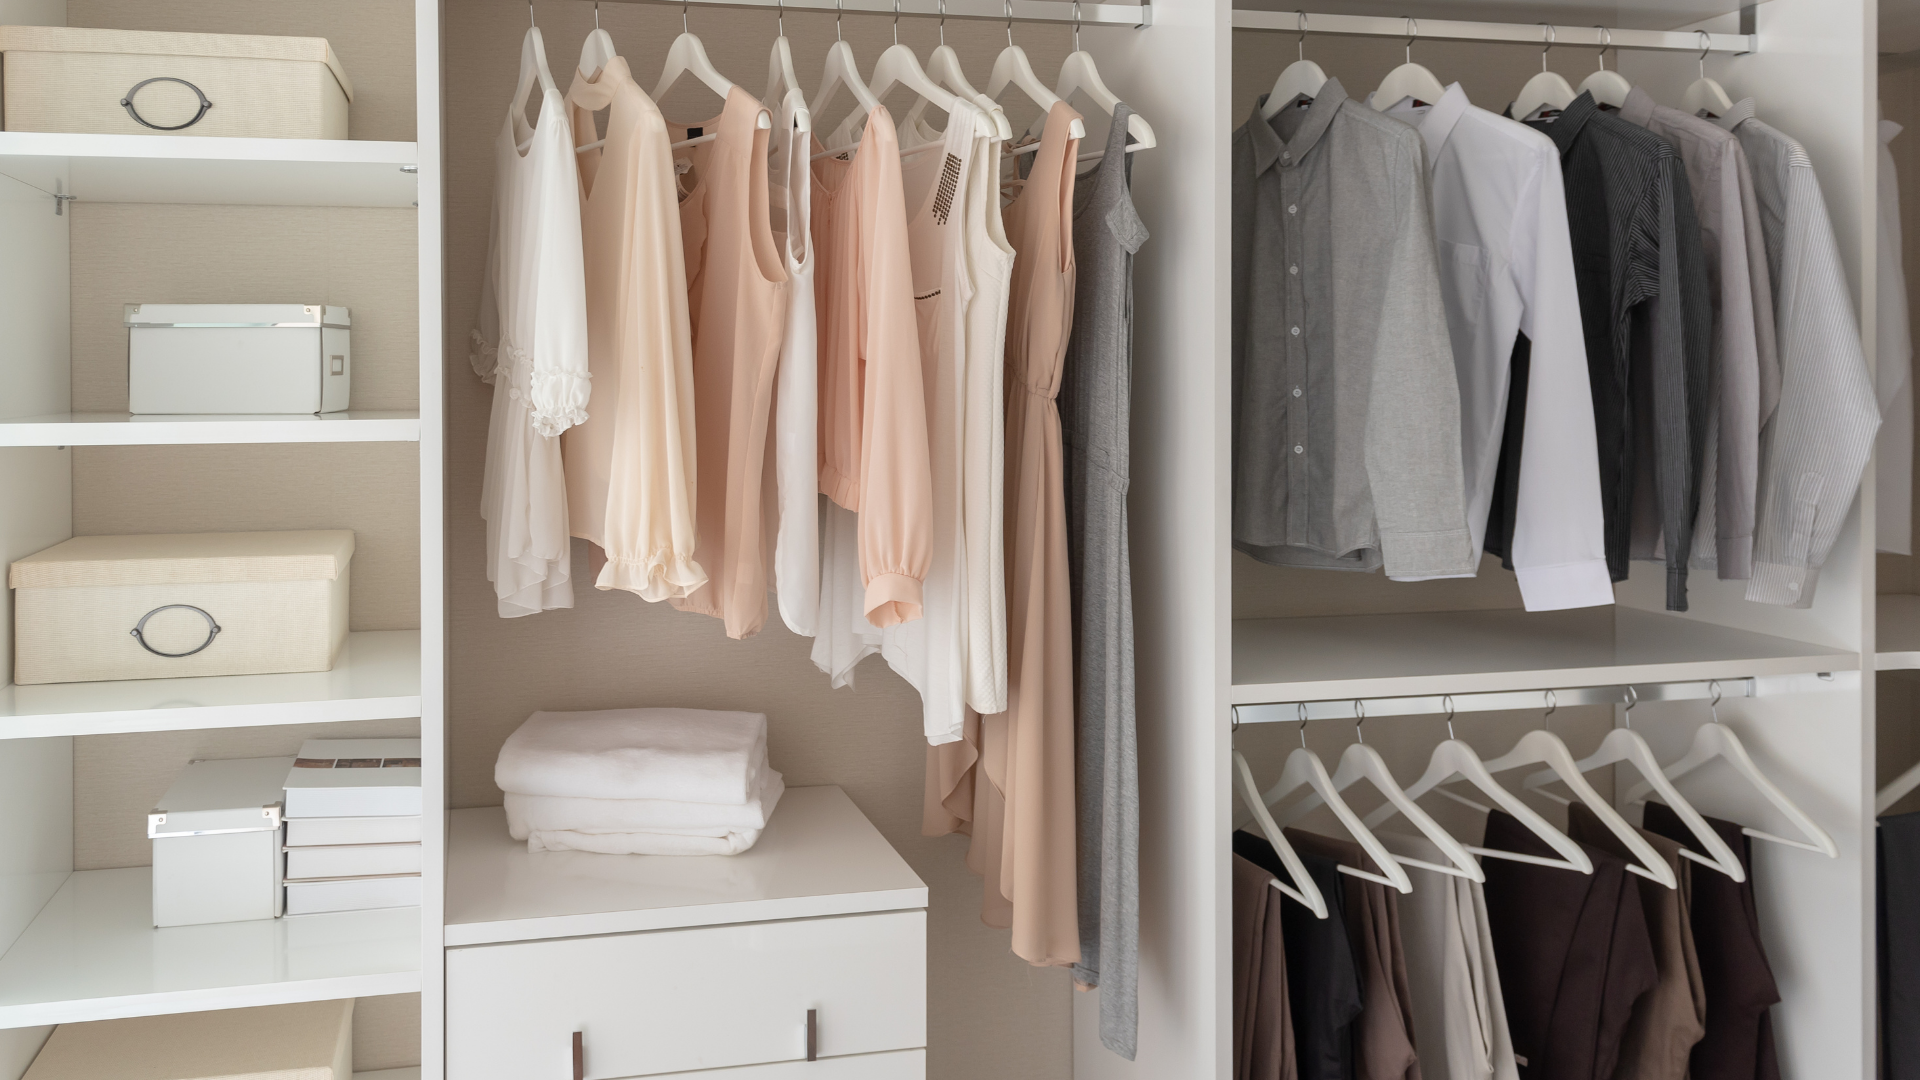 HOW TO CREATE A CAPSULE WARDROBE - PART ONE